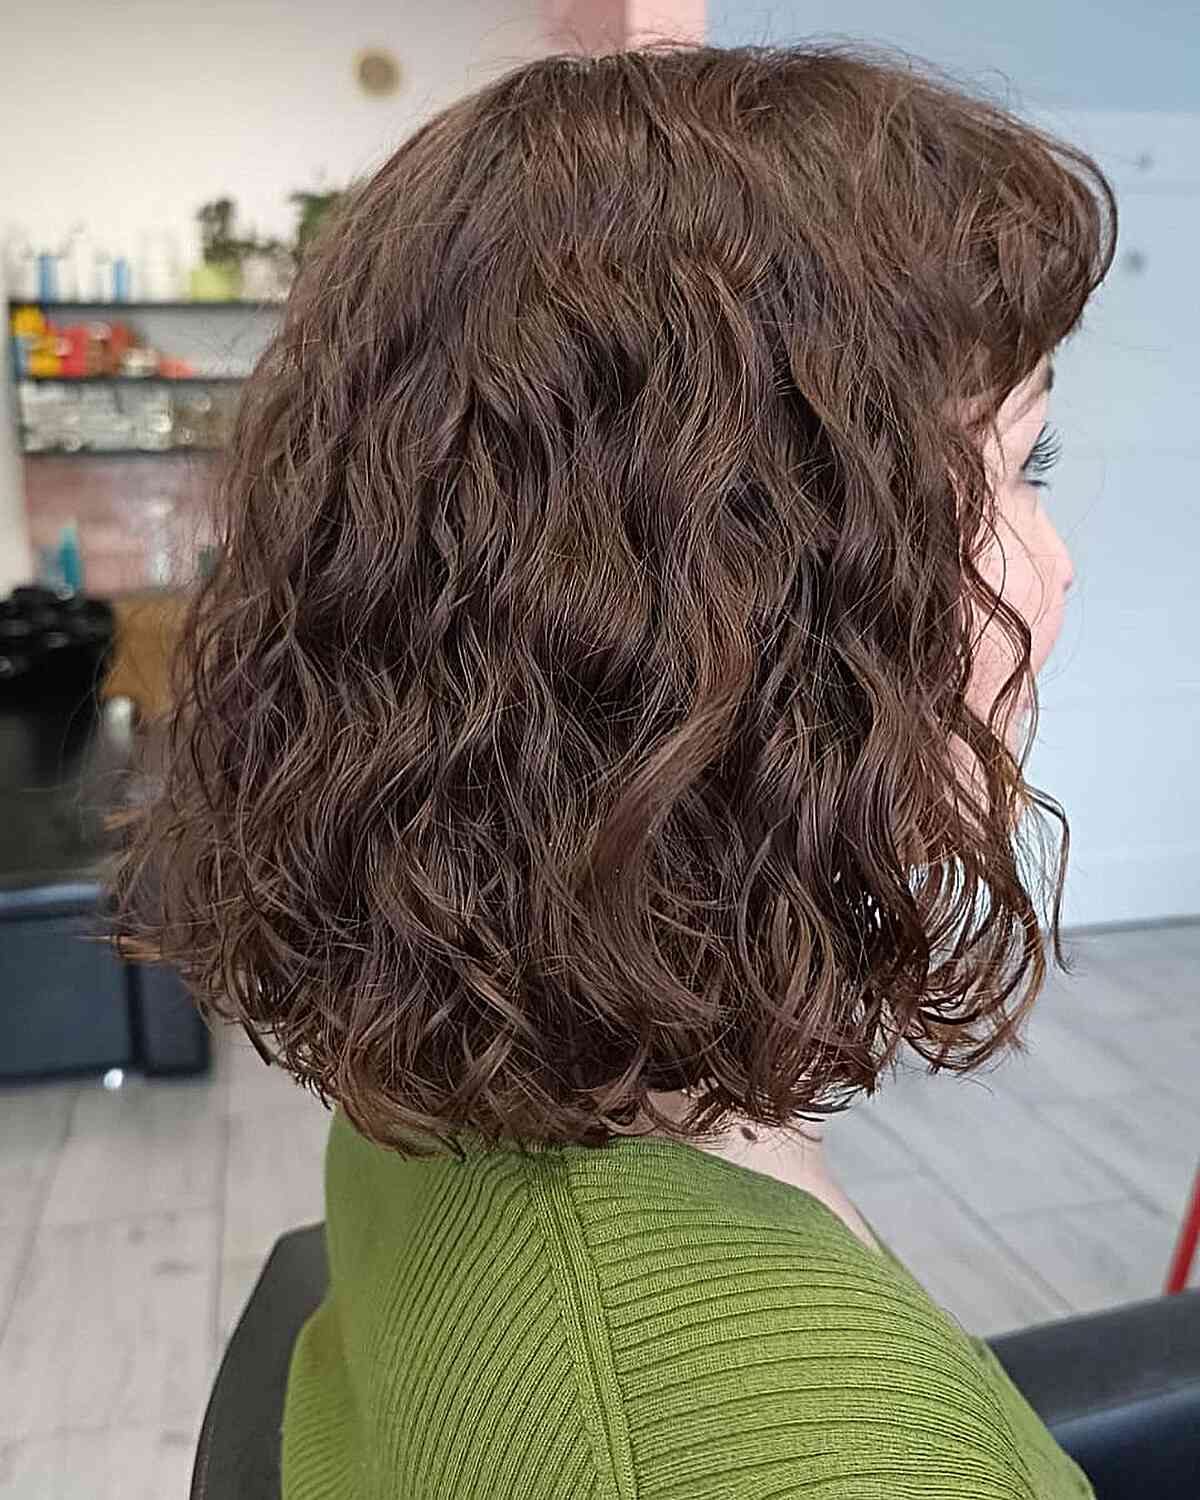 Short Permed Body Waves for Thick Hair